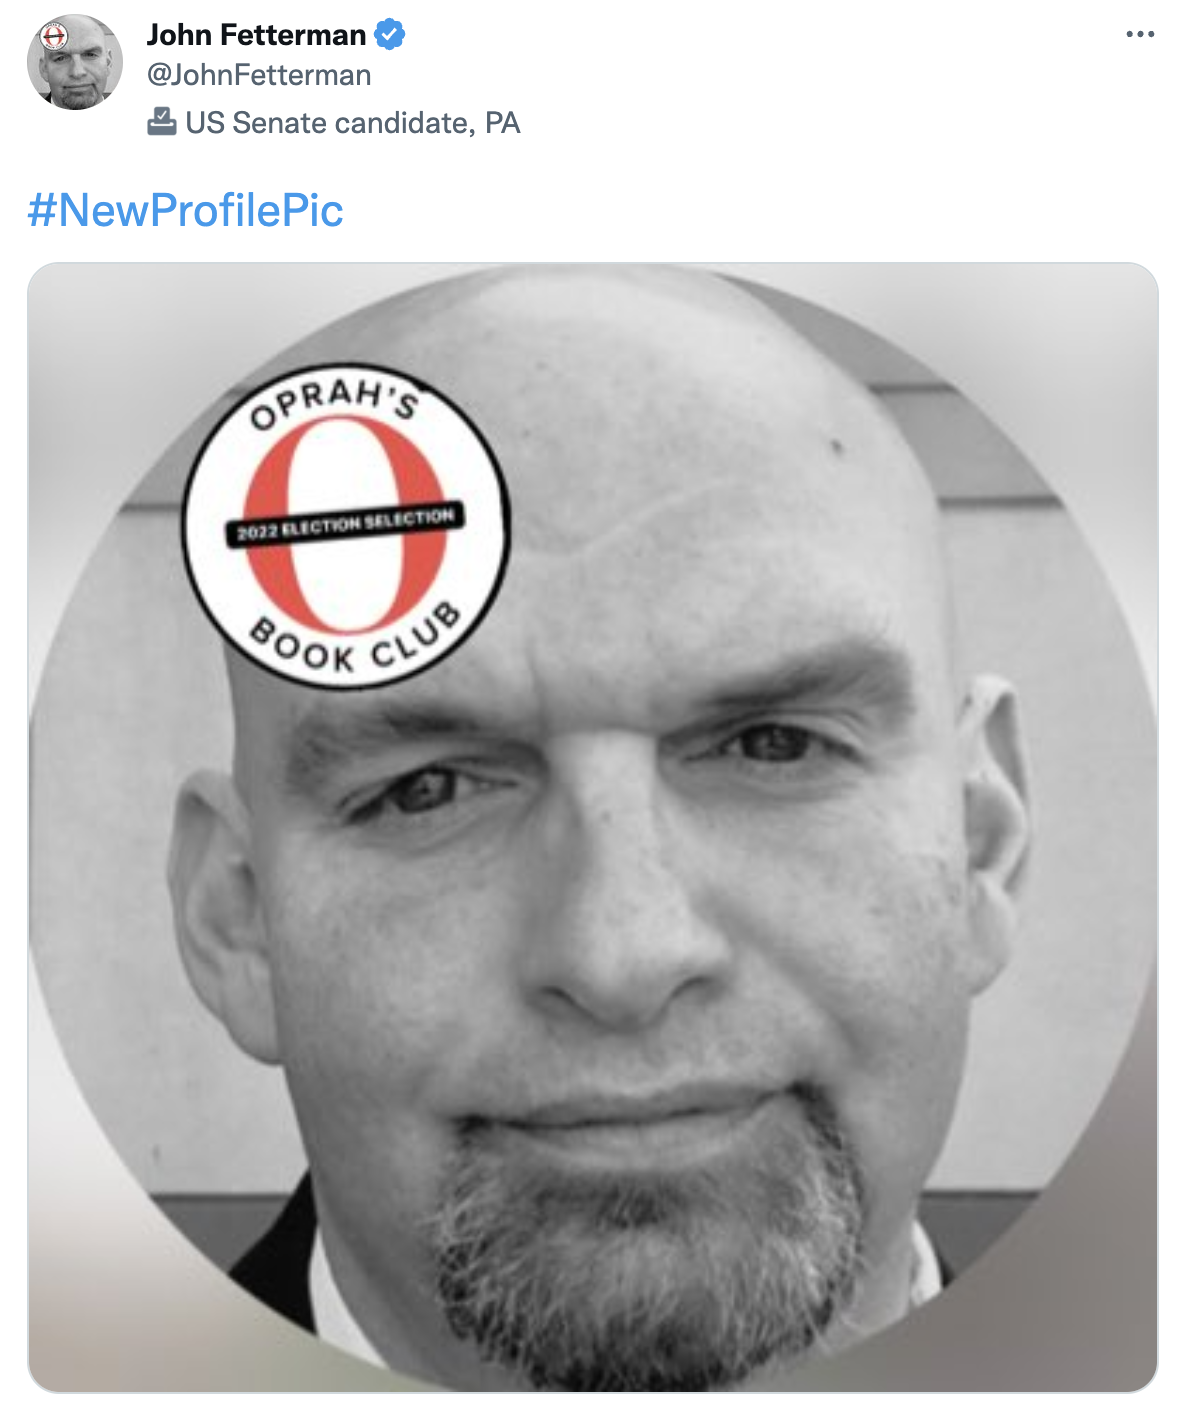 A tweet from John Fetterman with an Oprah's Book Club sticker over his face.